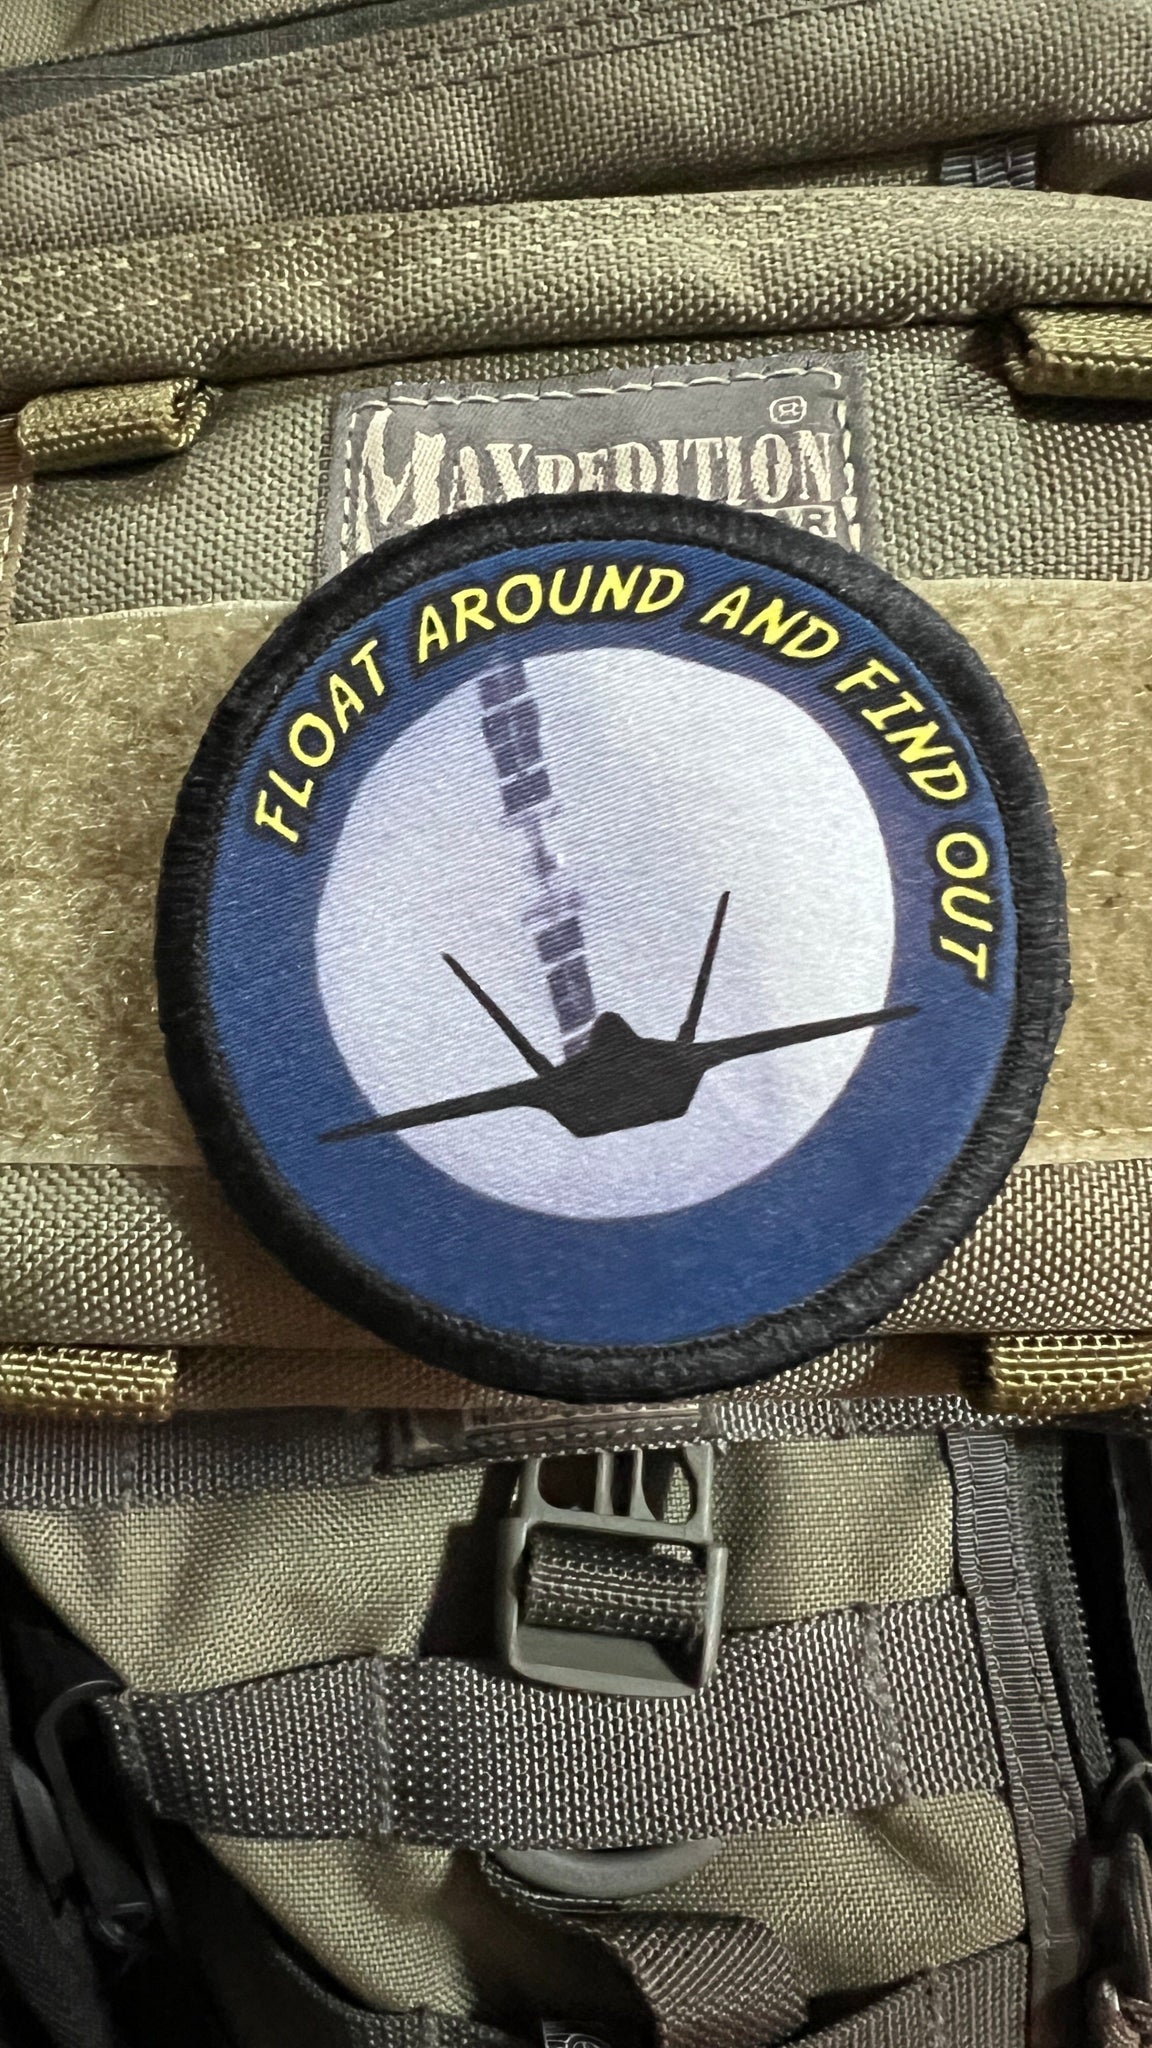 Float around and find out Chinese Spy Balloon Custom Velcro Morale Patch